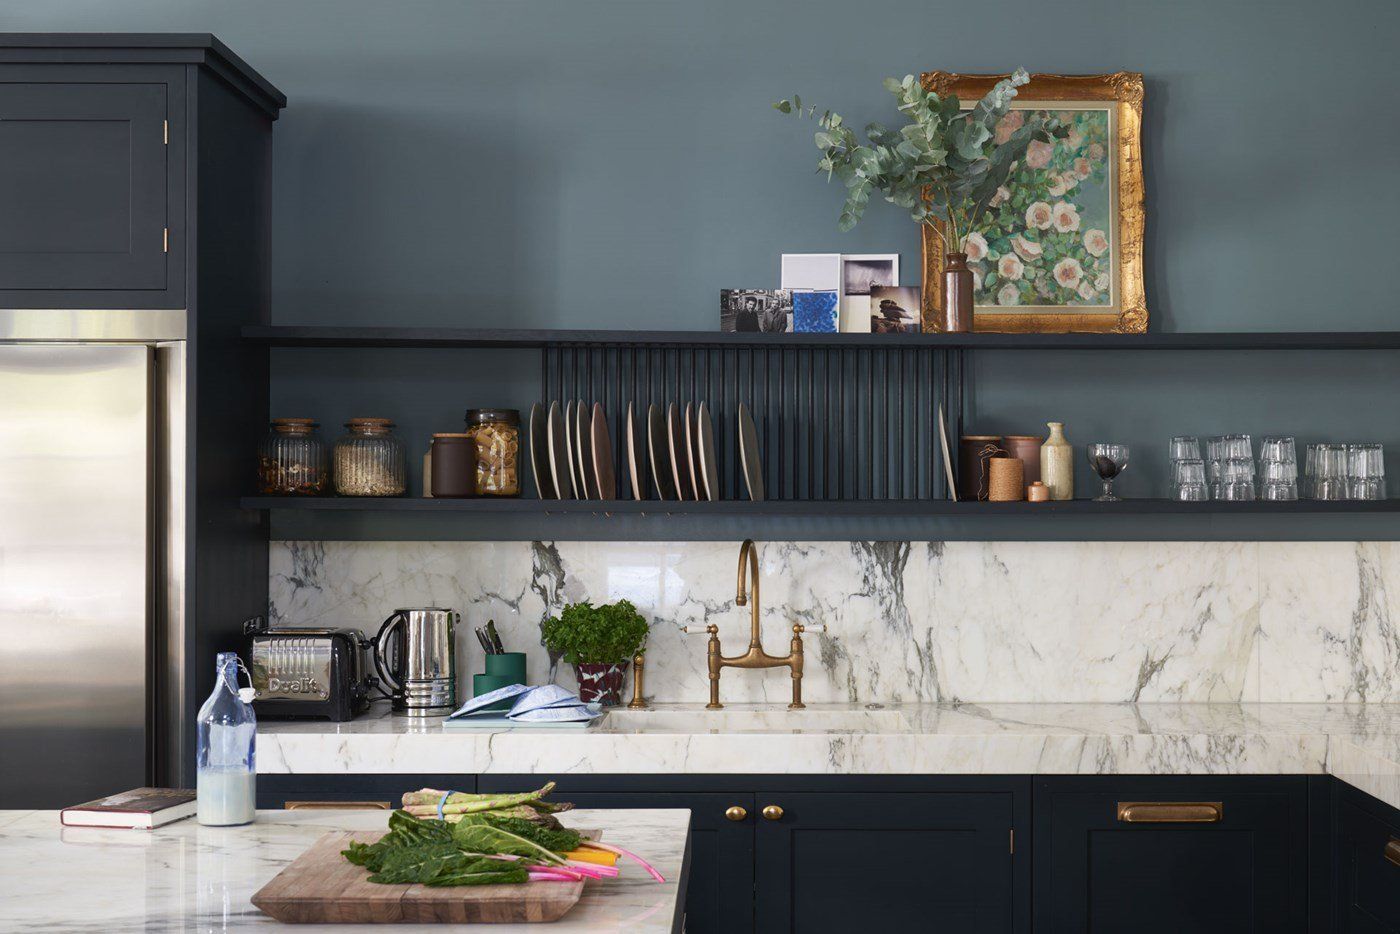 25 Kitchen Trends   What Styles Are In for Kitchens in 25